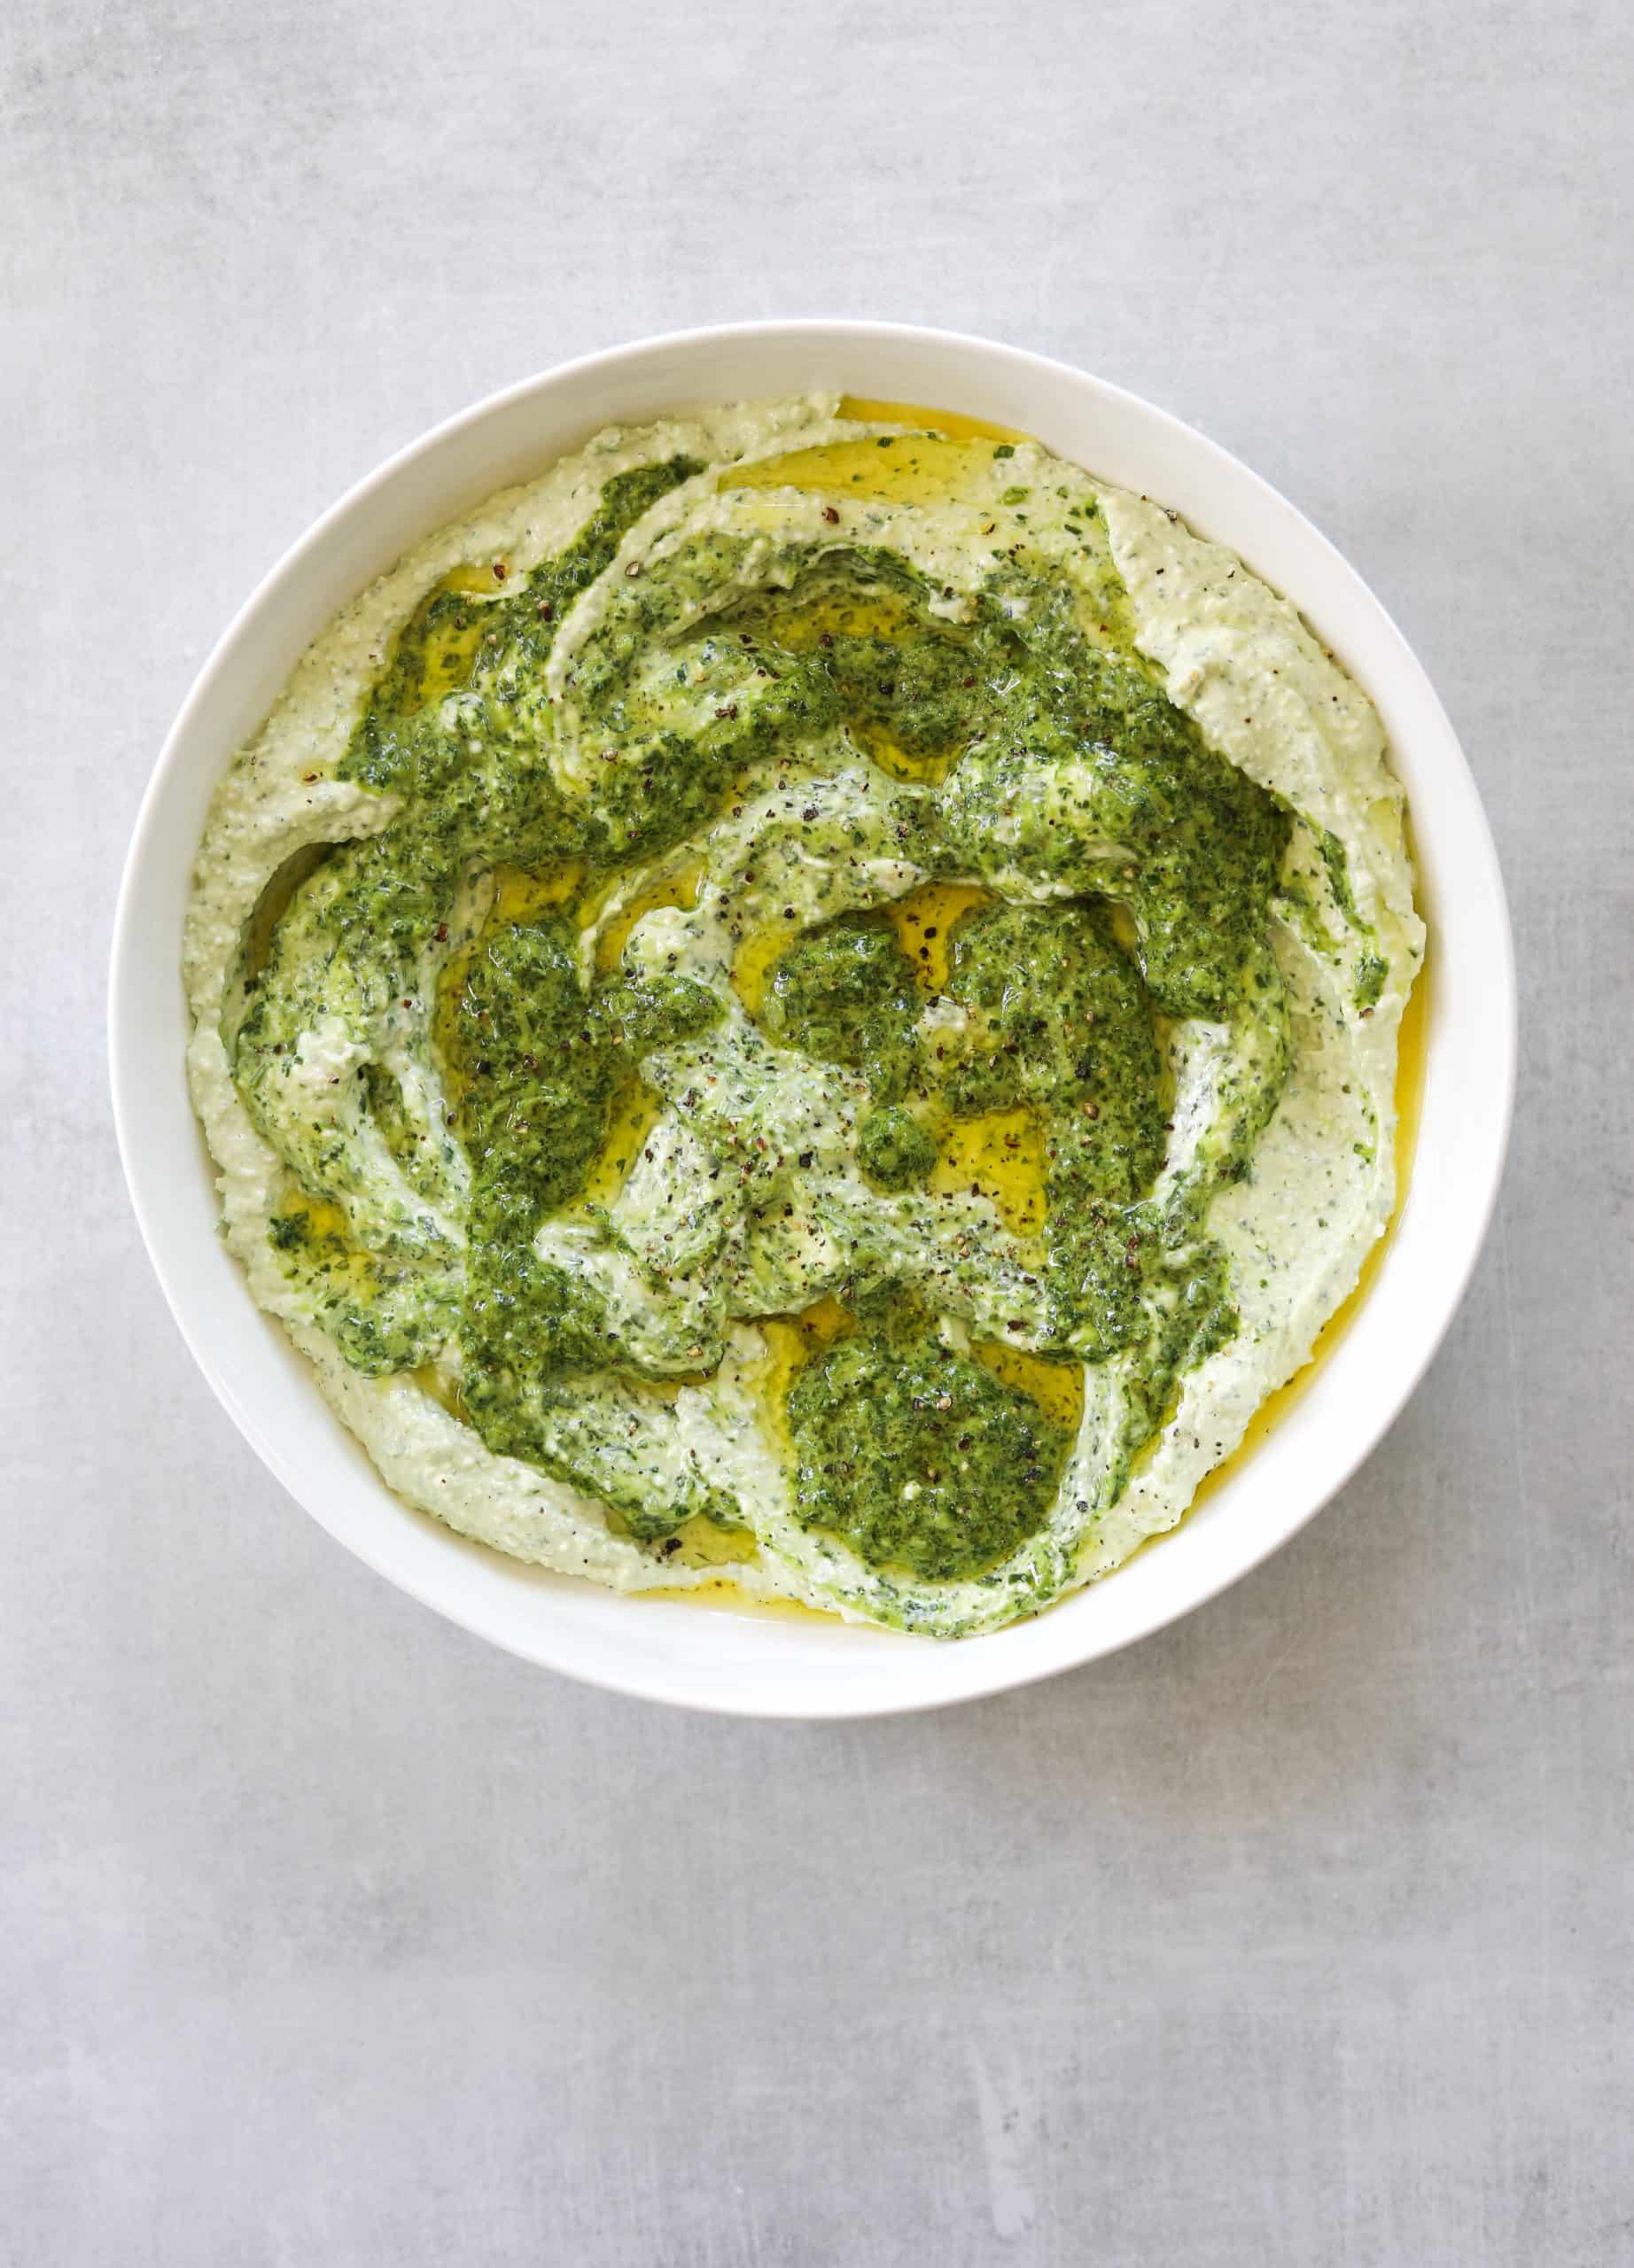 Whipped Feta Dip with Garlic, Herbs, and Jalapeño